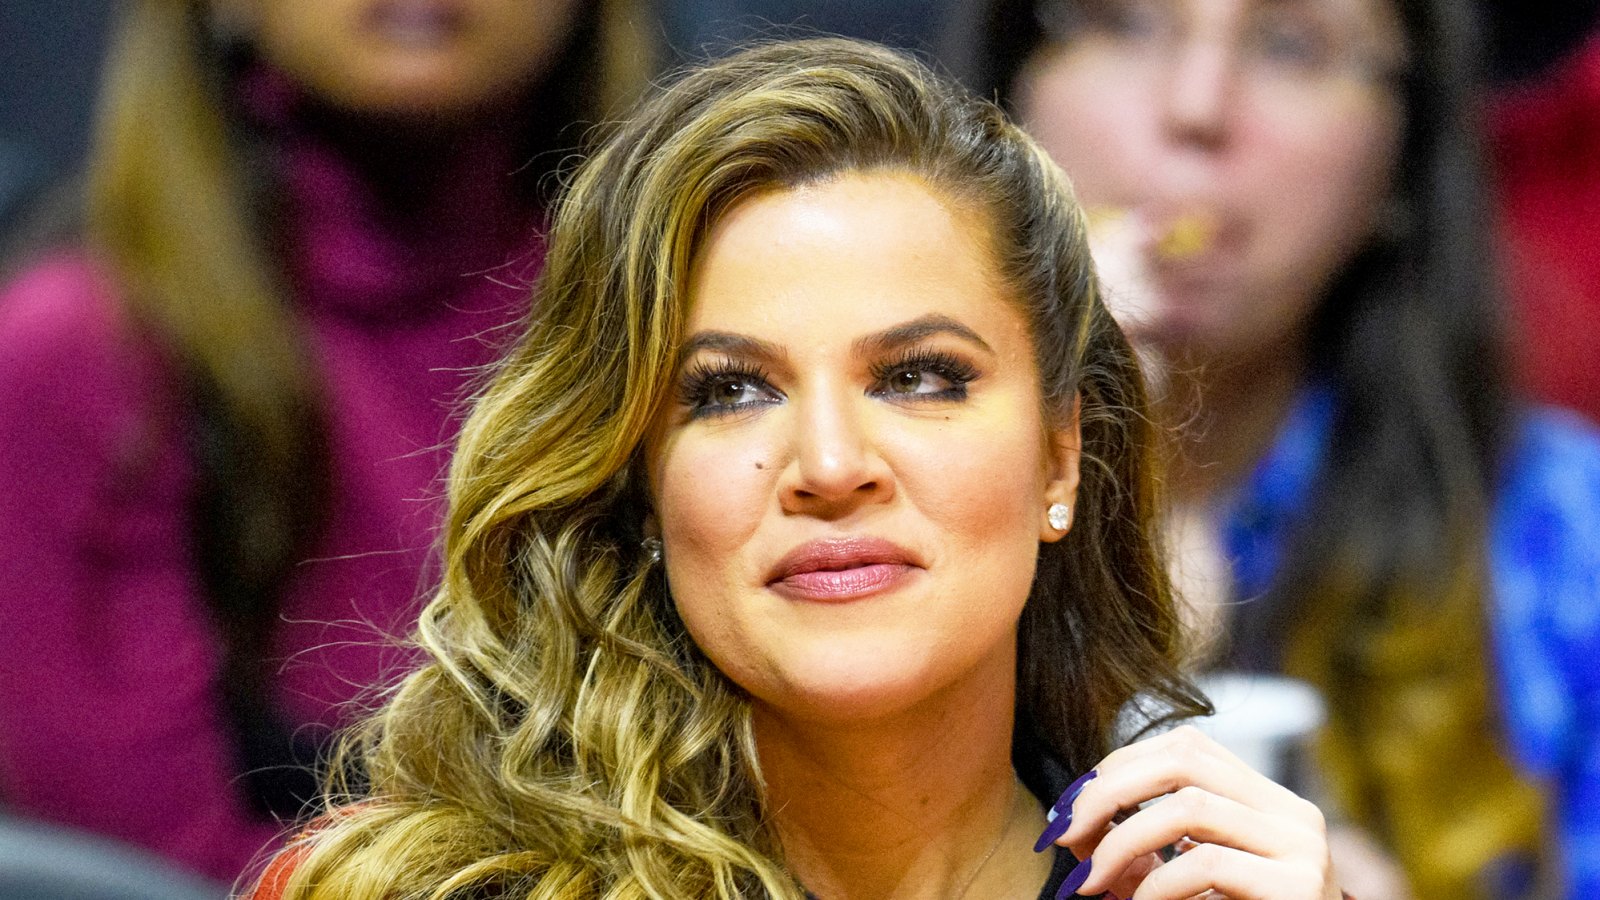 Khloe Kardashian attends a 2014 basketball game between the Detroit Pistons and the Los Angeles Clippers at Staples Center in Los Angeles, California.